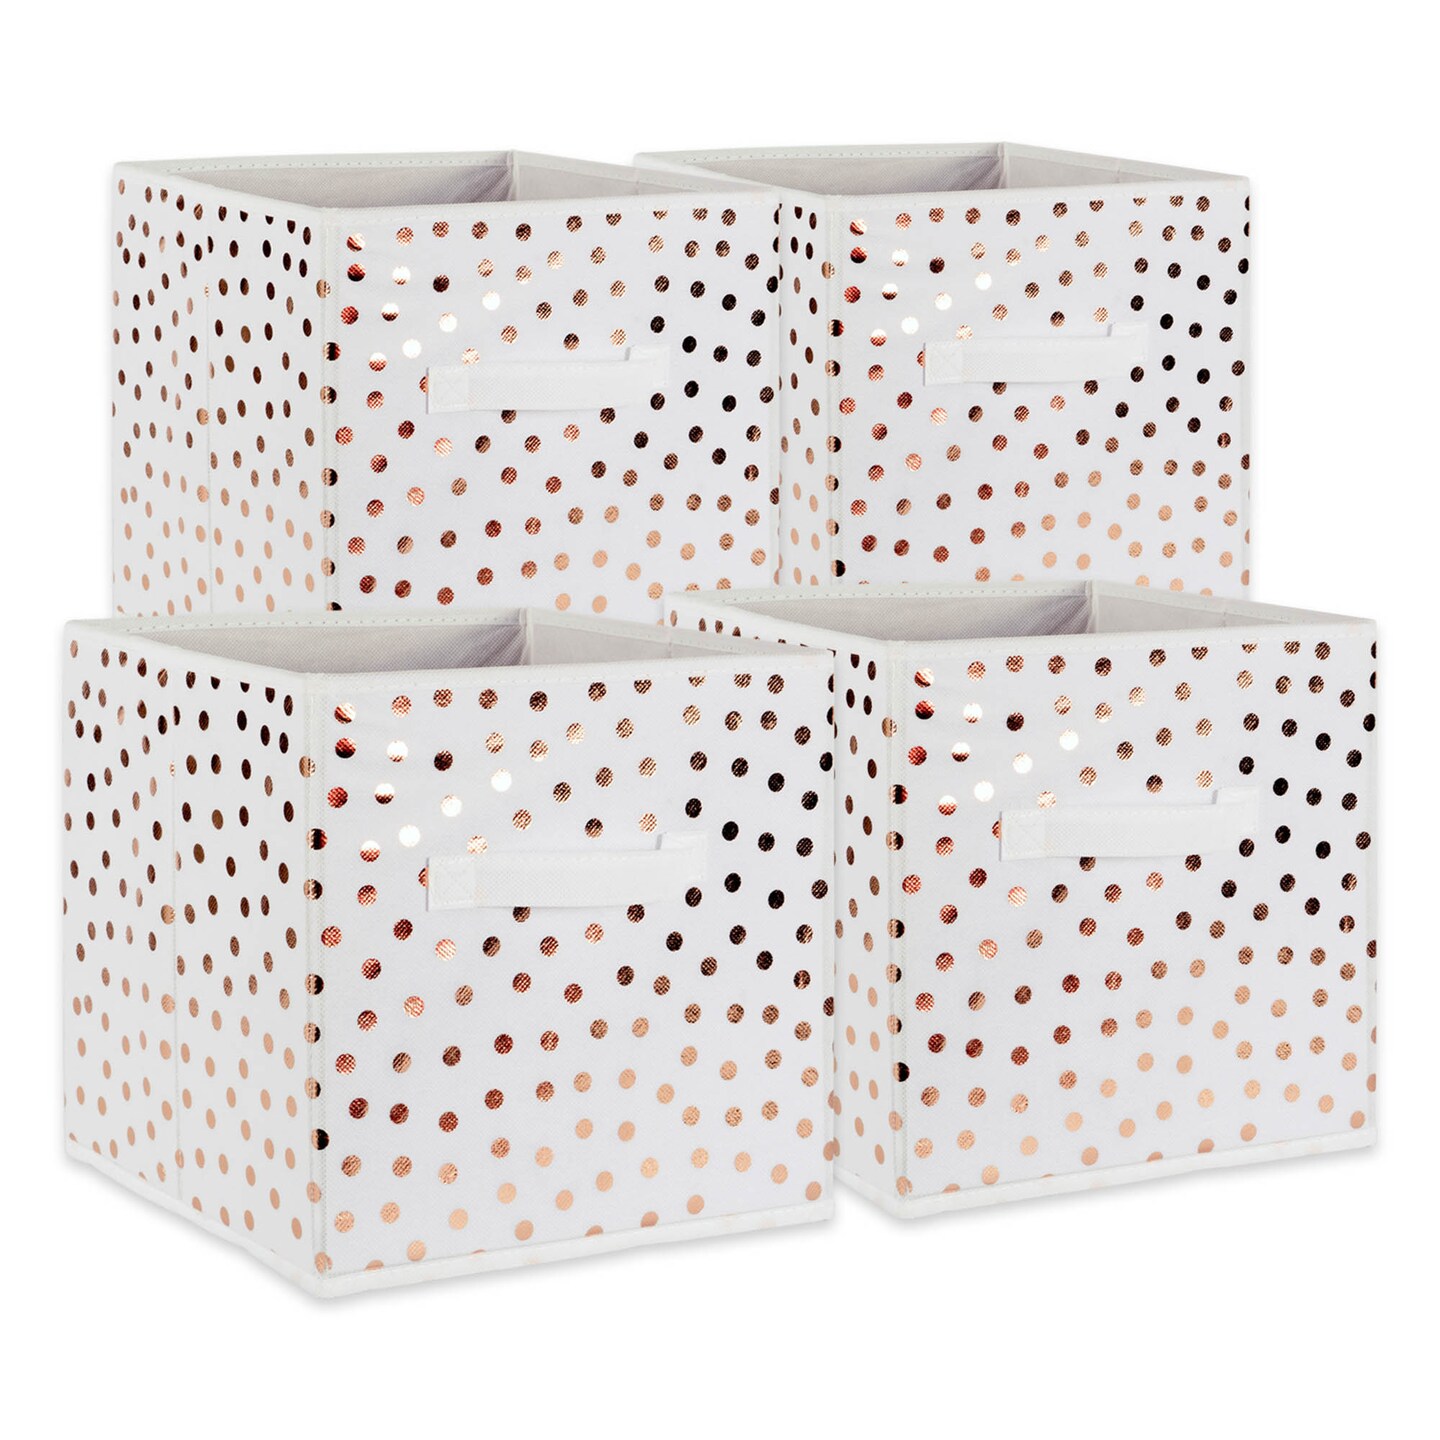 Sleek Plastic Storage Bins for a Neat and Organized Home